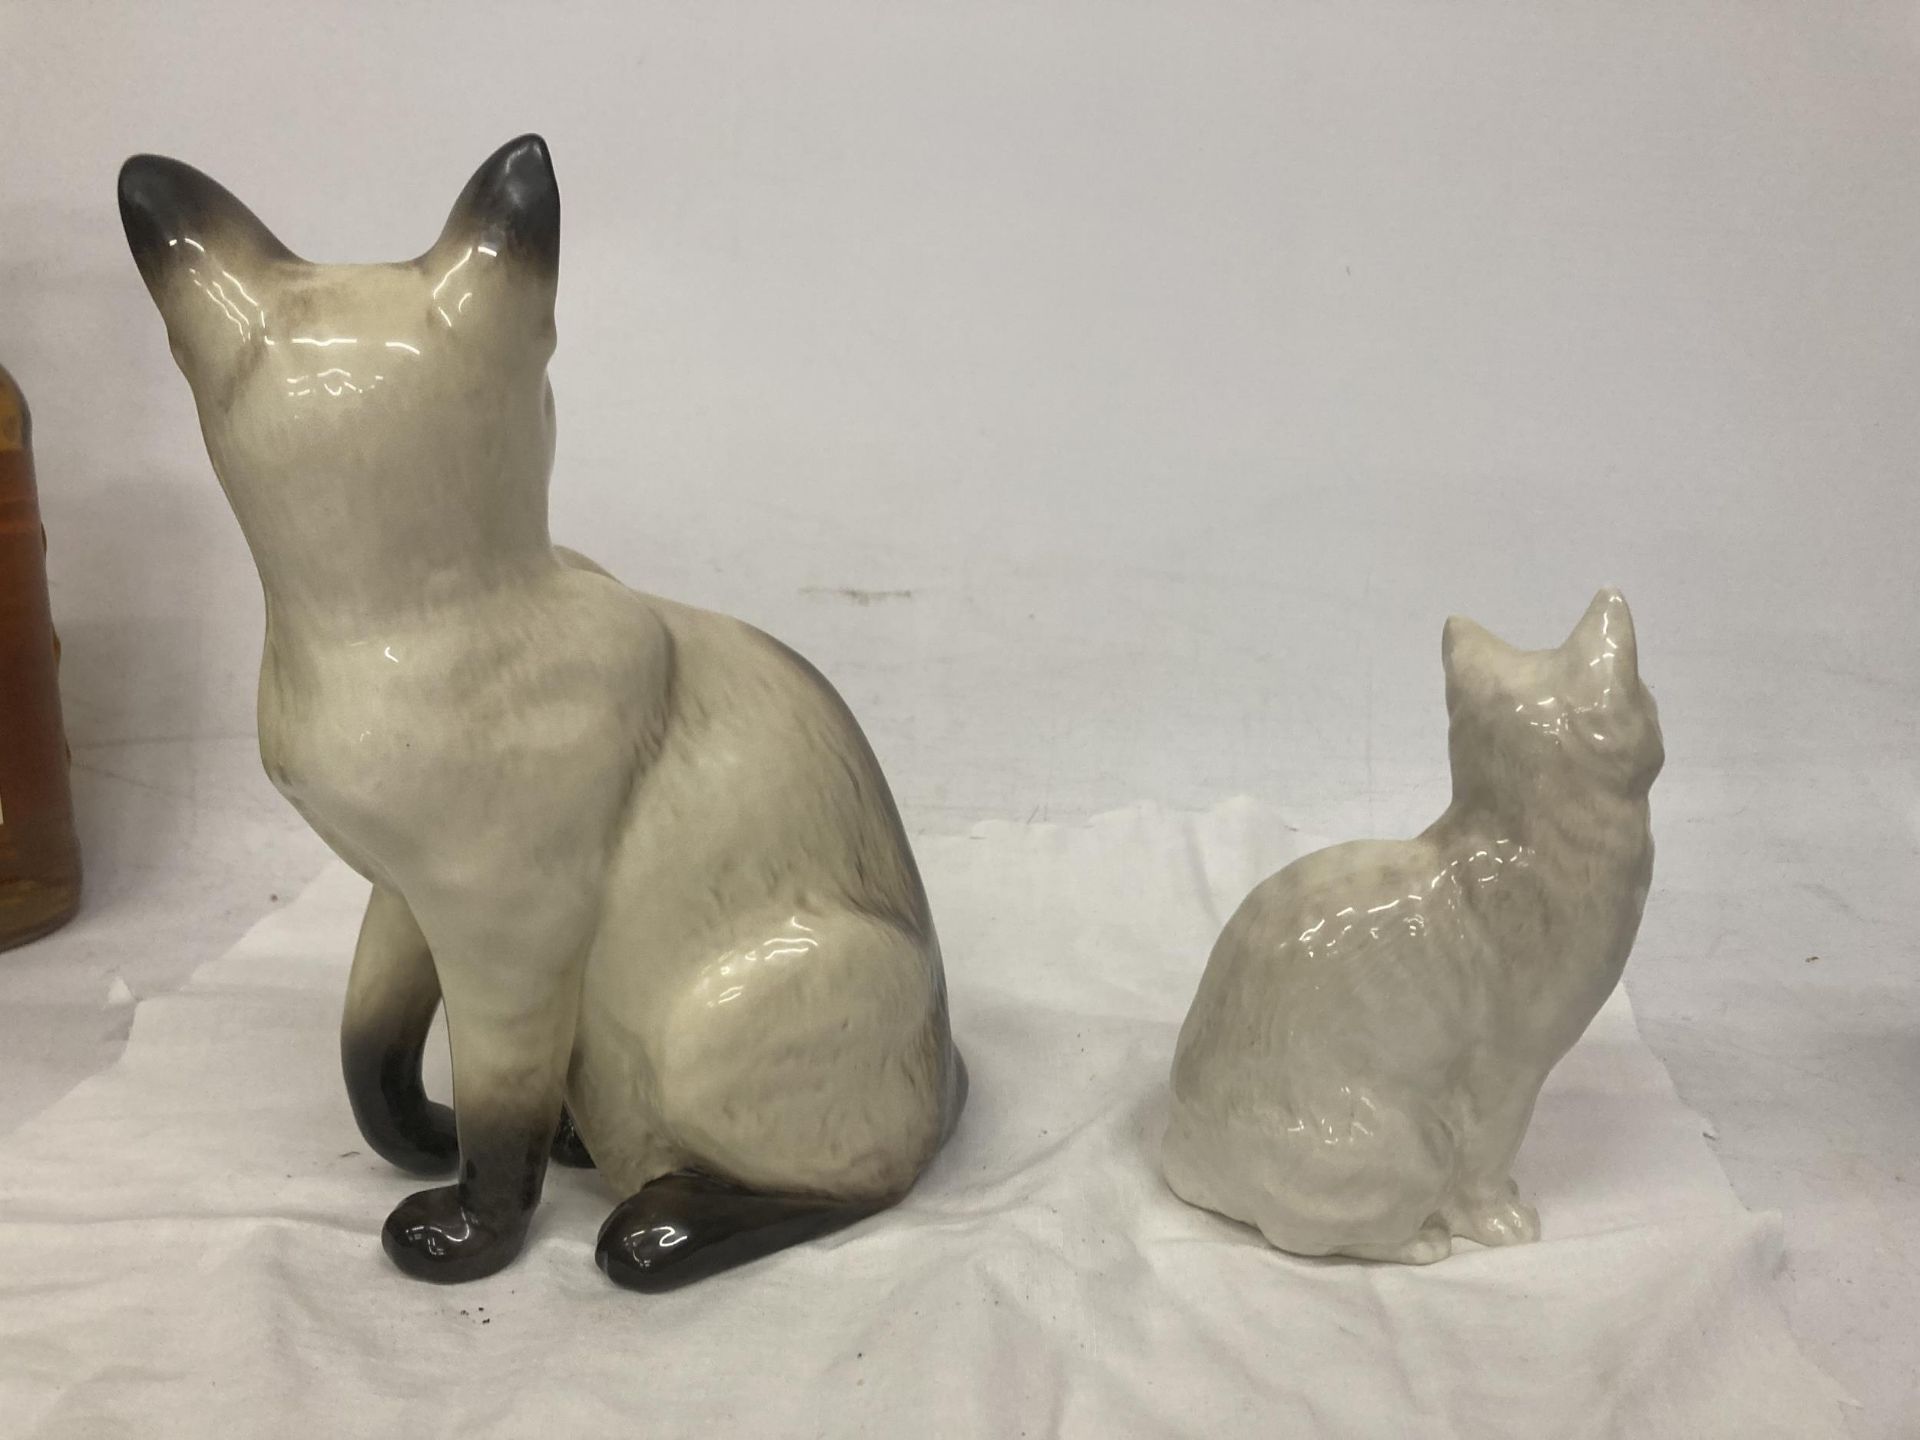 A LARGE BESWICK SIAMESE CAT TOGETHER WITH A WHITE BESWICK CAT 1030 - Image 4 of 5